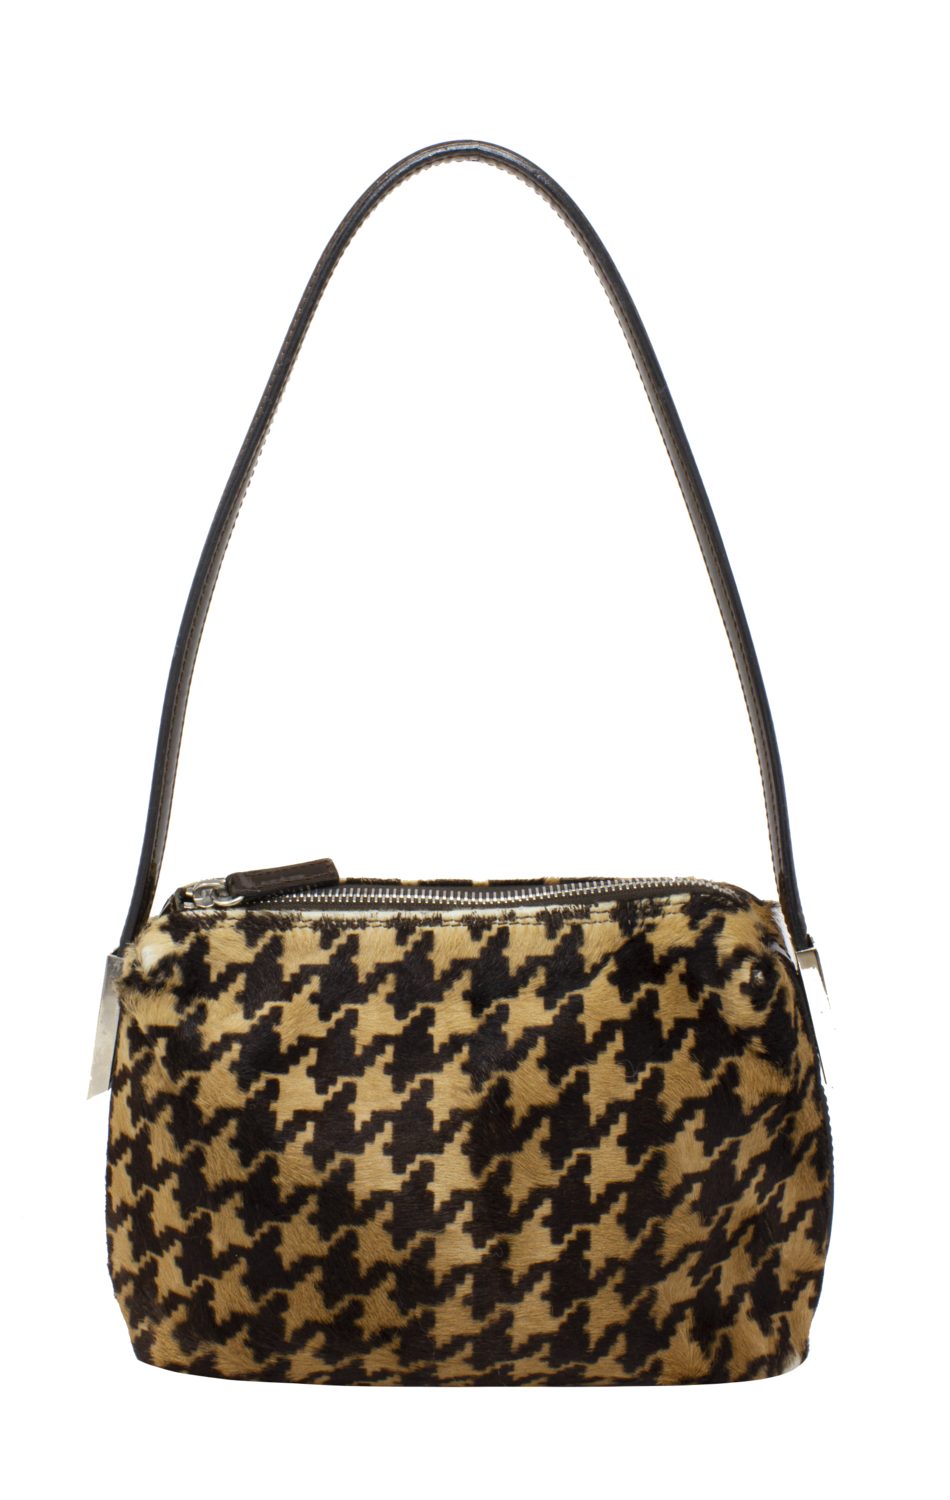 Dolce & Gabbana Houndstooth Black and Brown Baguette